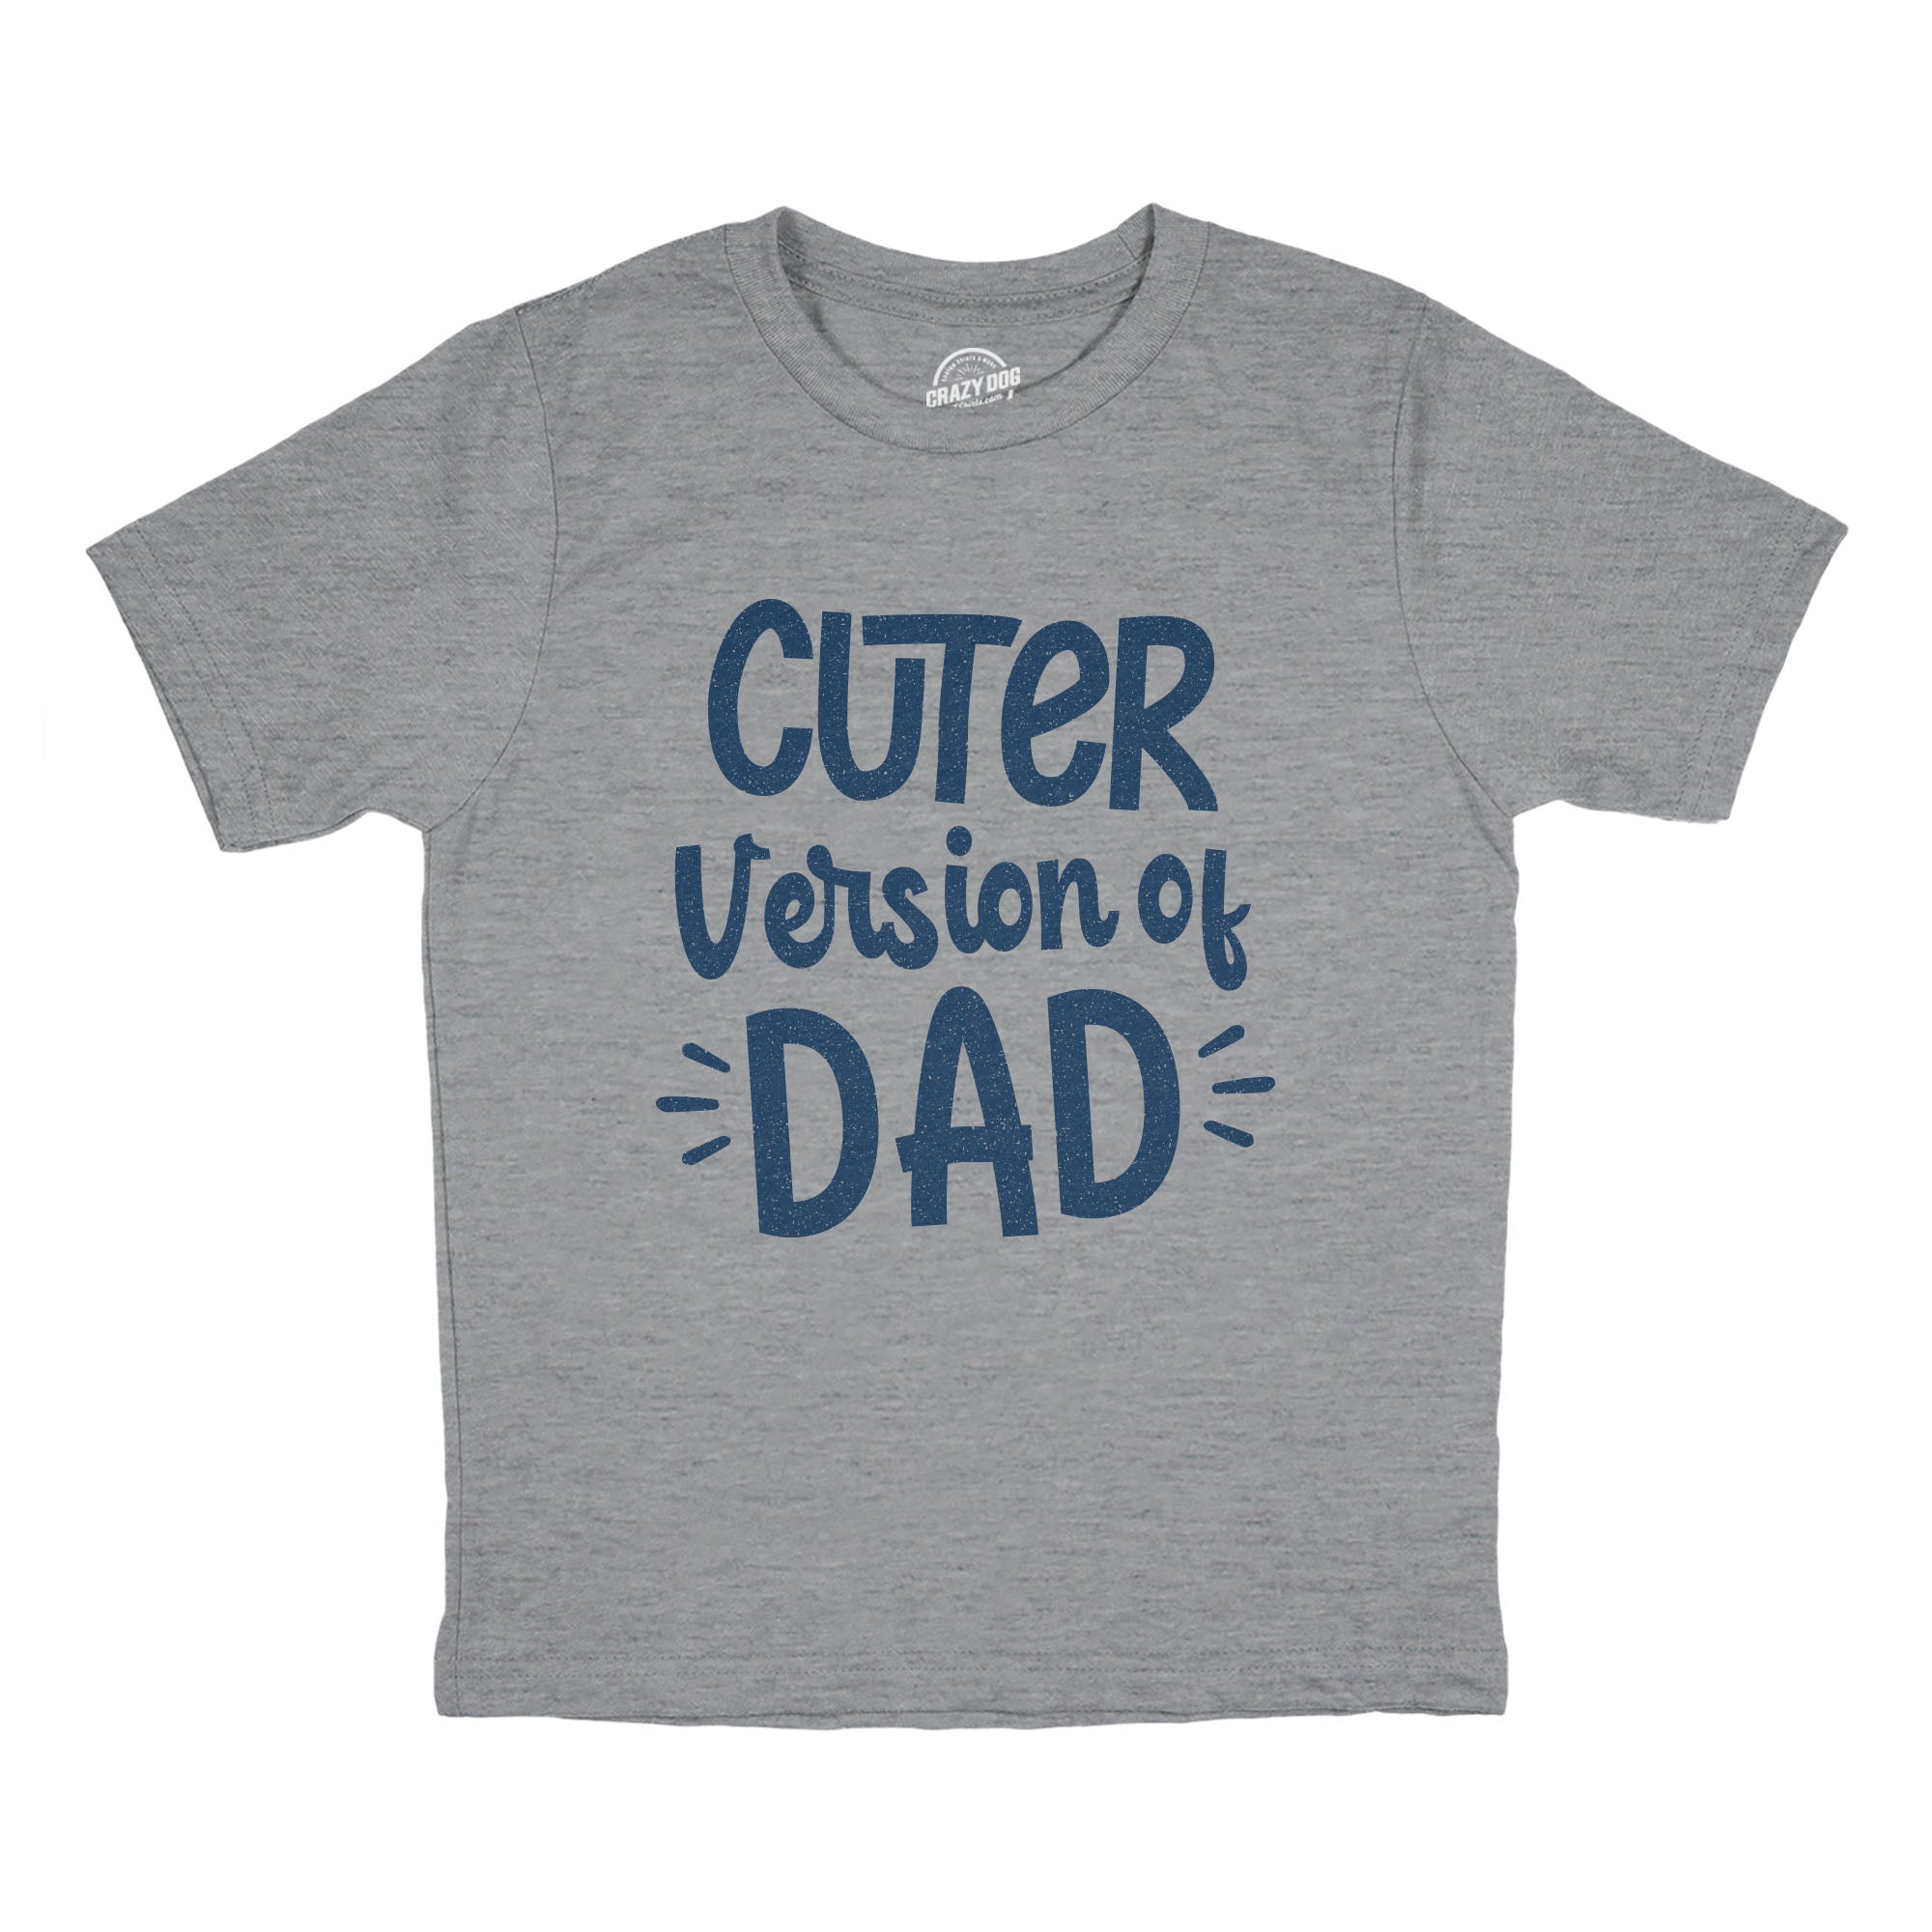 Funny Light Heather Grey Cuter Version Of Dad Youth T Shirt Nerdy Sarcastic Tee